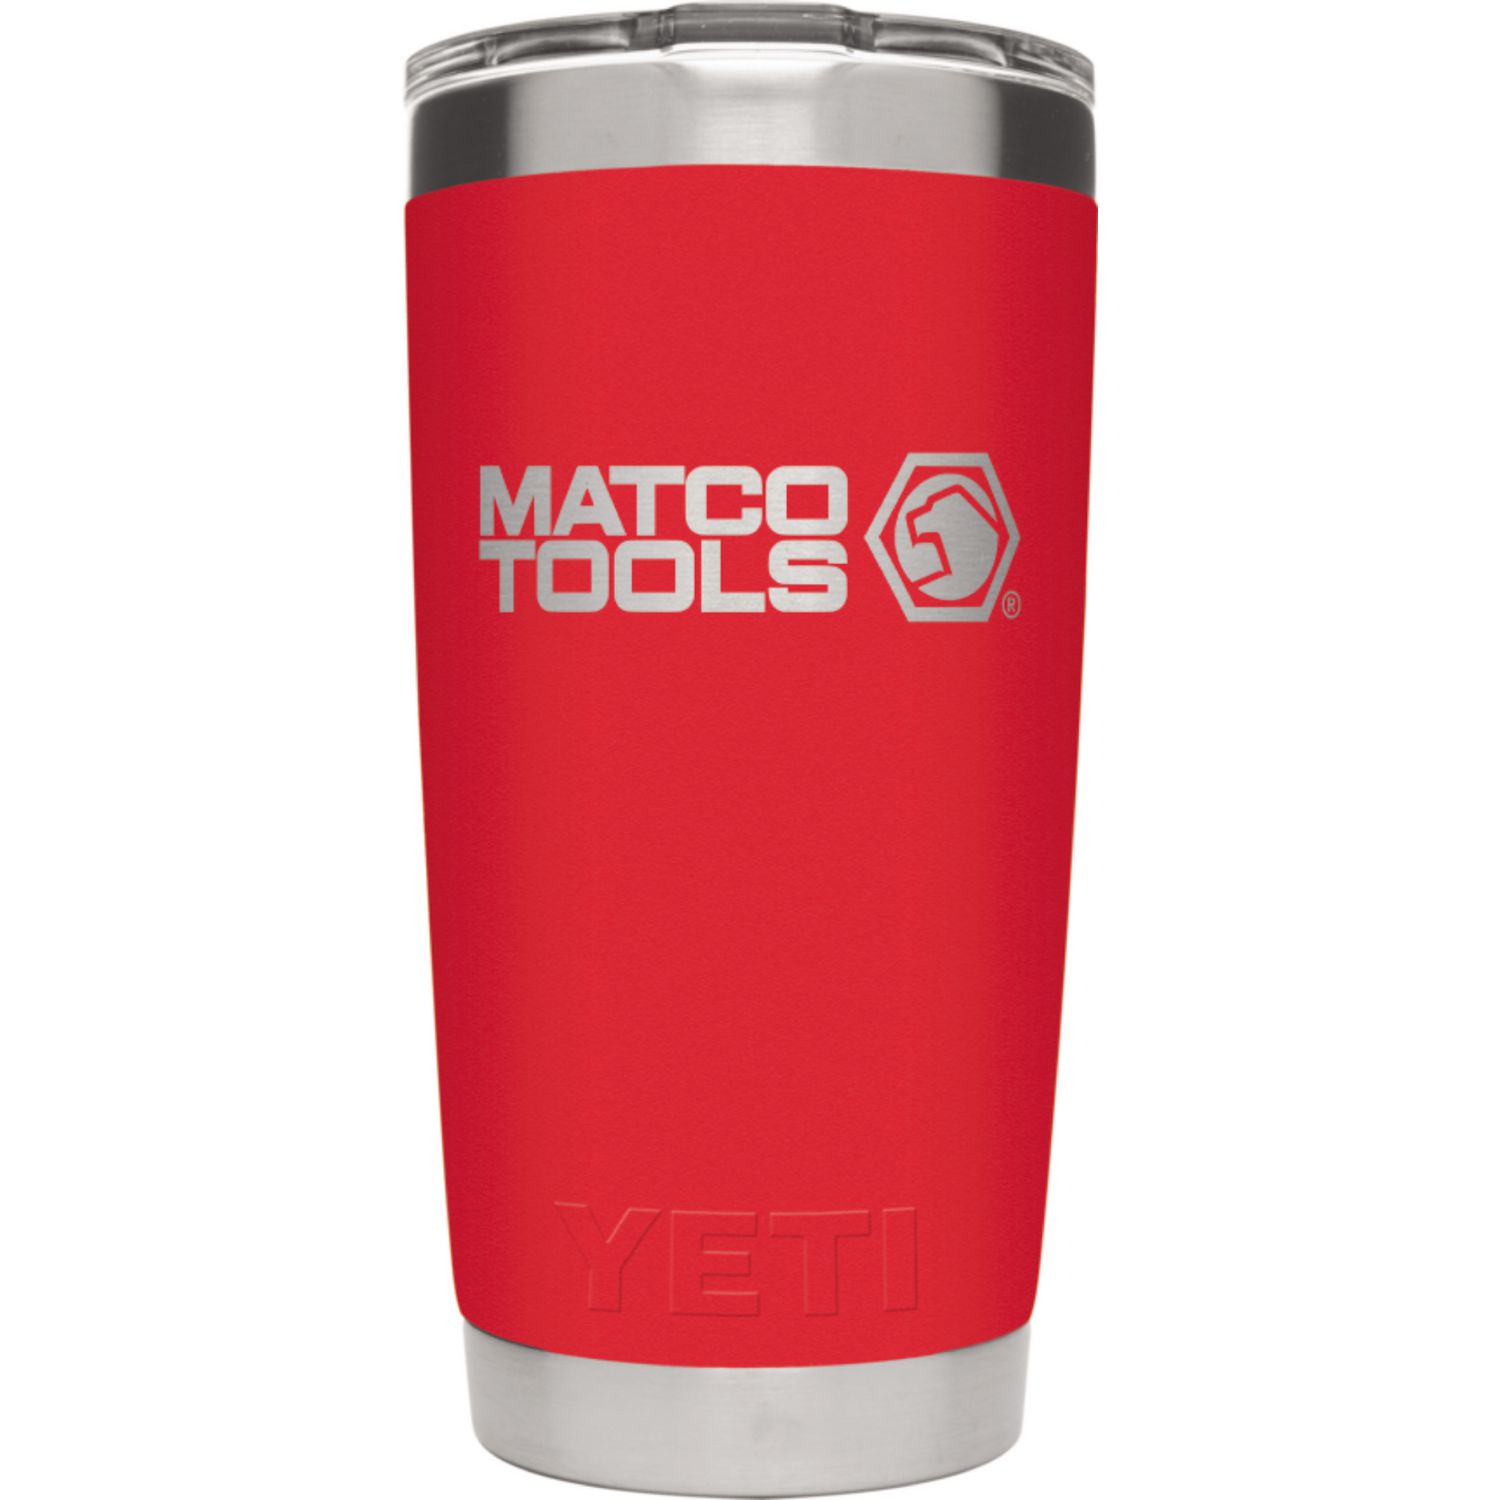 Yeti Rambler 20 Oz Cocktail Shaker Rescue Red 21071502534 from Yeti - Acme  Tools